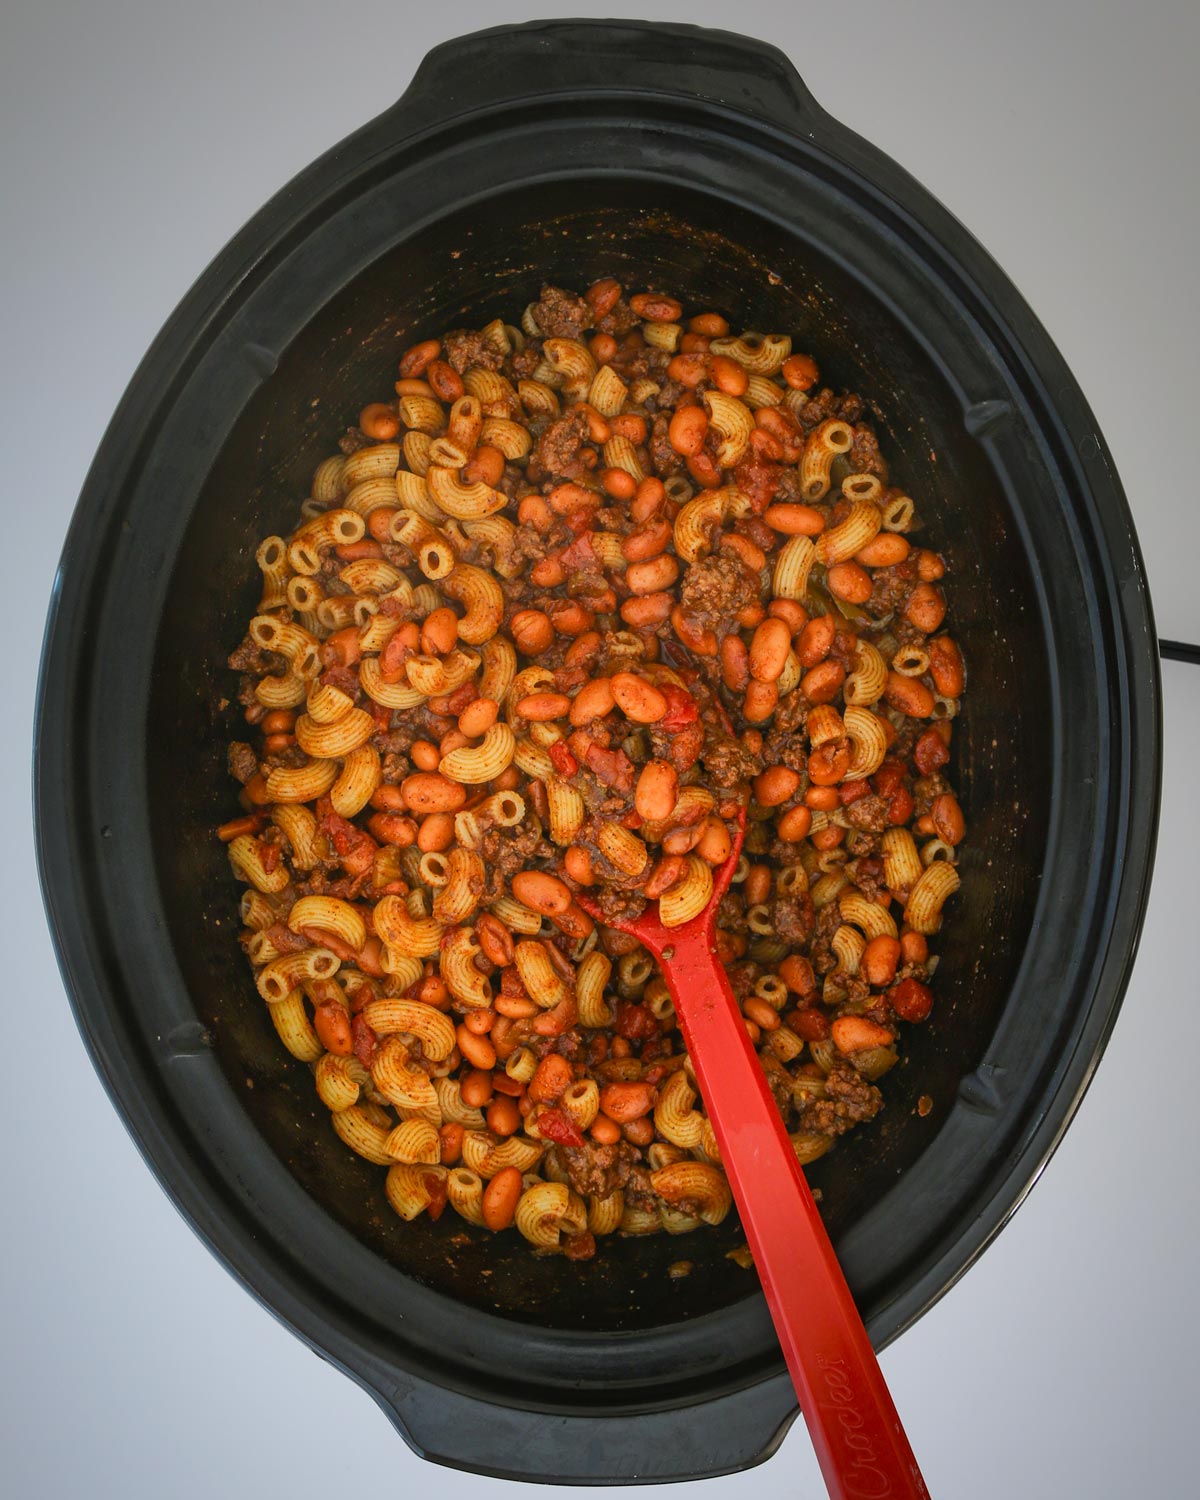 chili mac in the slow cooker with a red spoon.